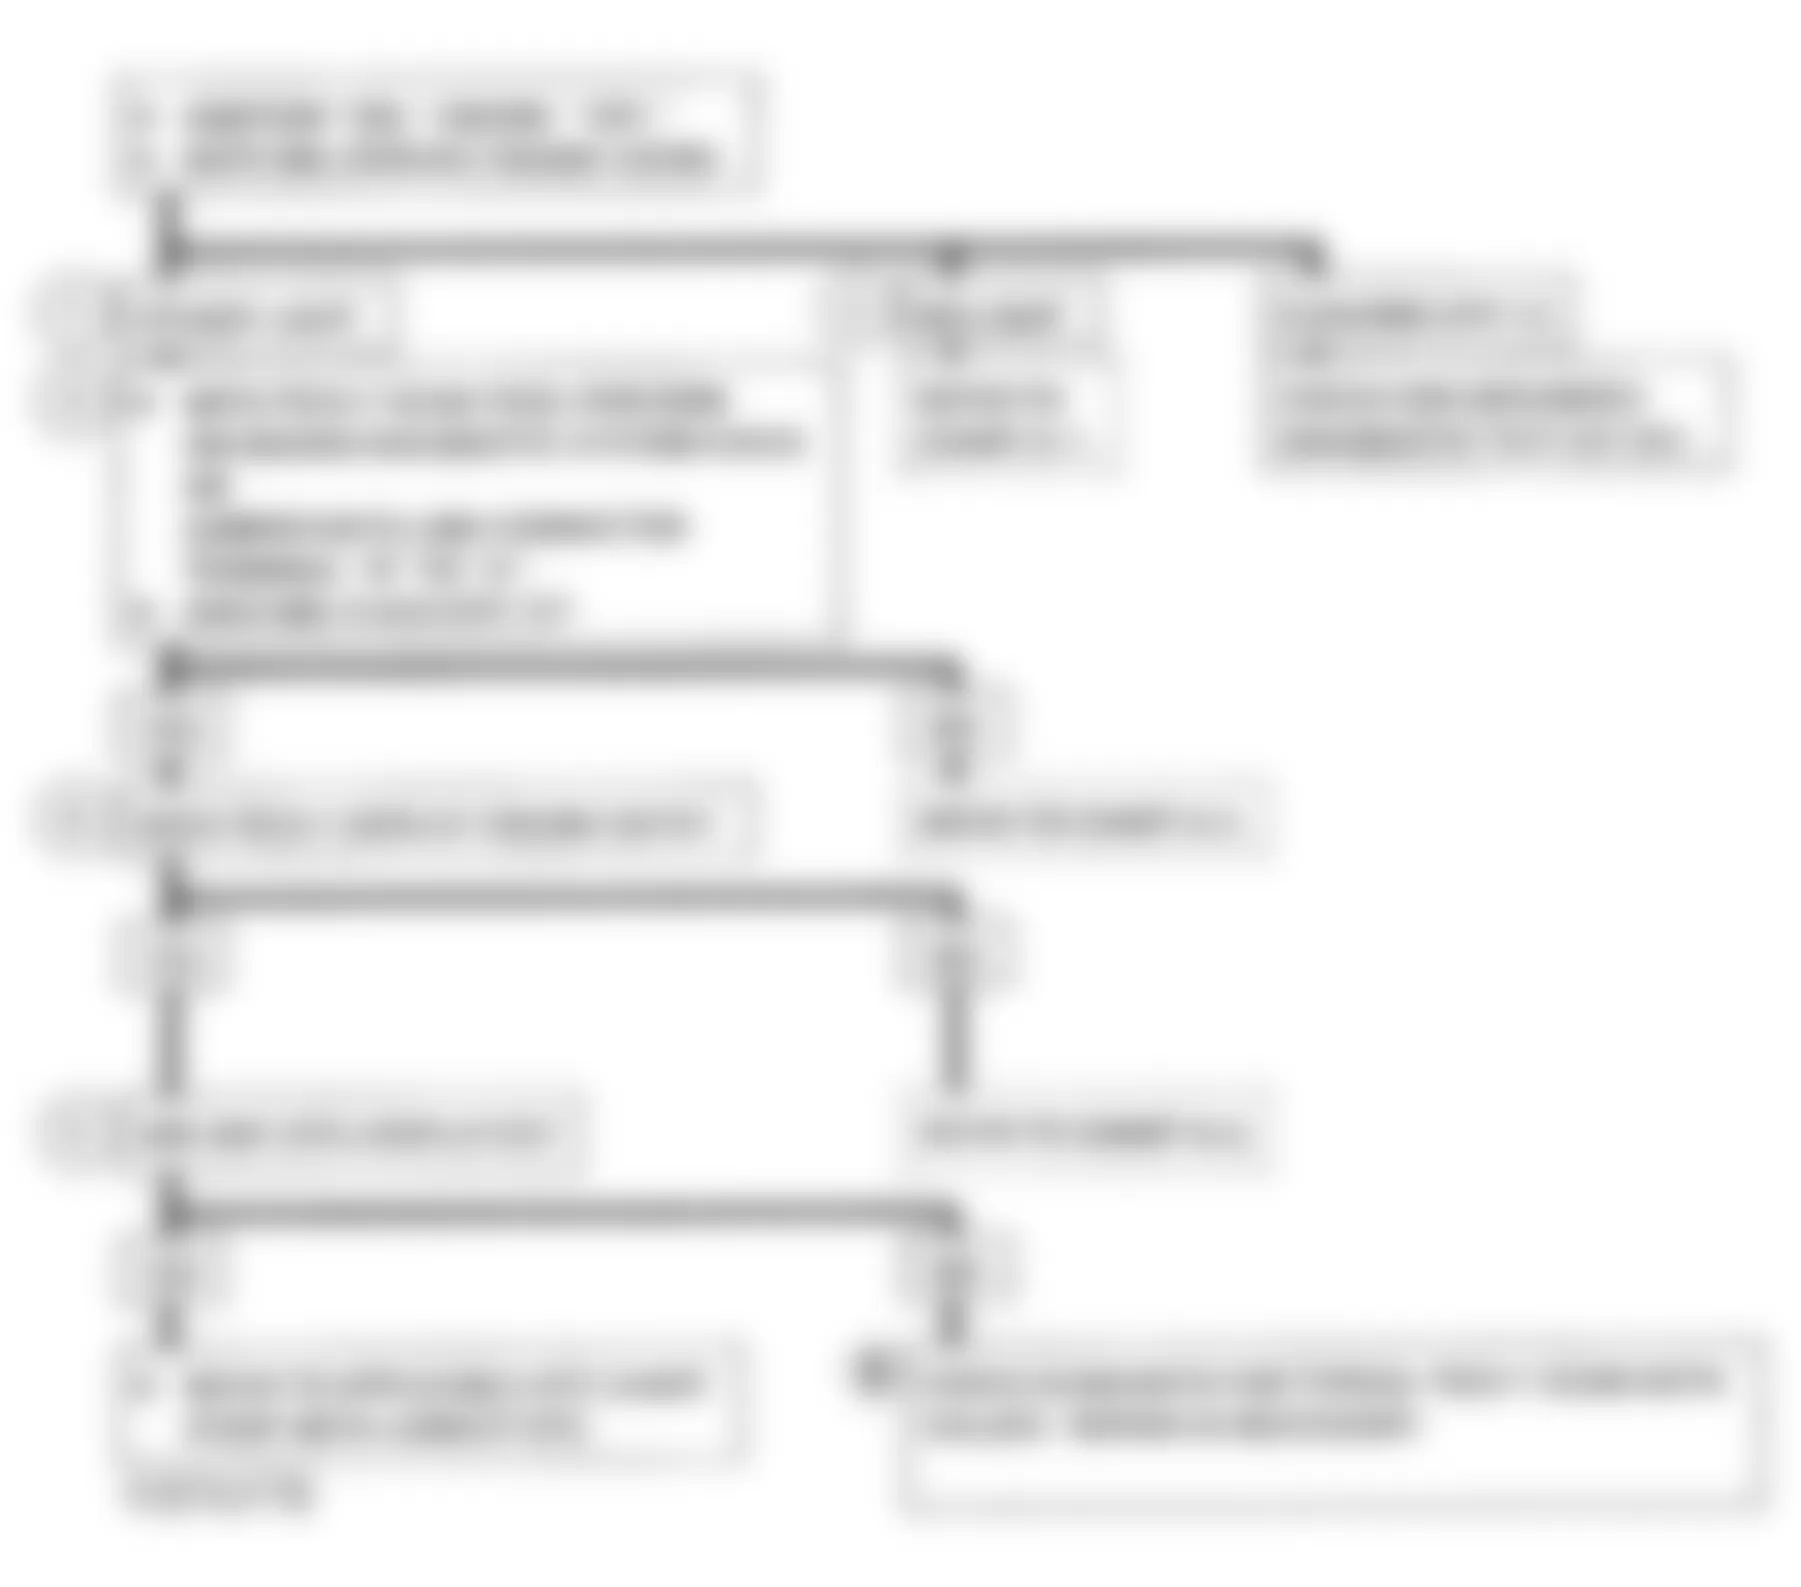 GMC Suburban C1500 1993 - Component Locations -  Flowchart, System Check A/T